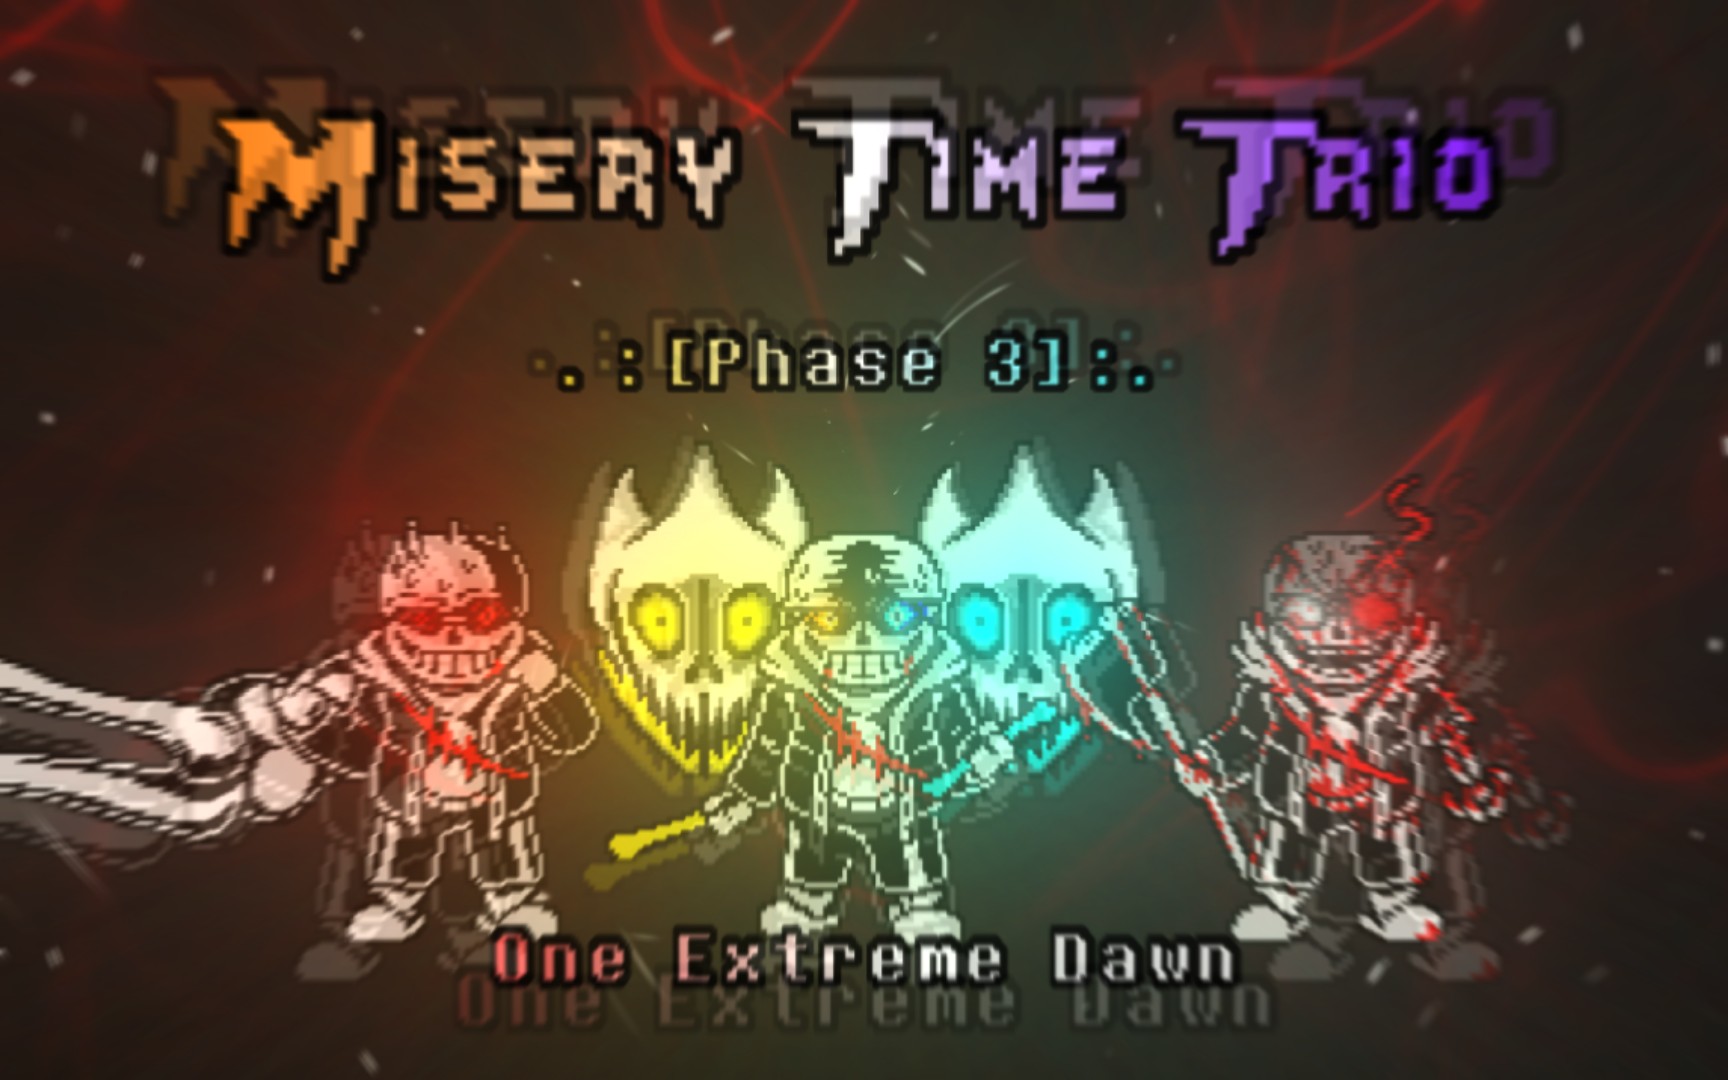 [UST] misery time trio phase3 [One Extreme Dawn] 完整版！！！！！！😱😱😱😱😱😱😱